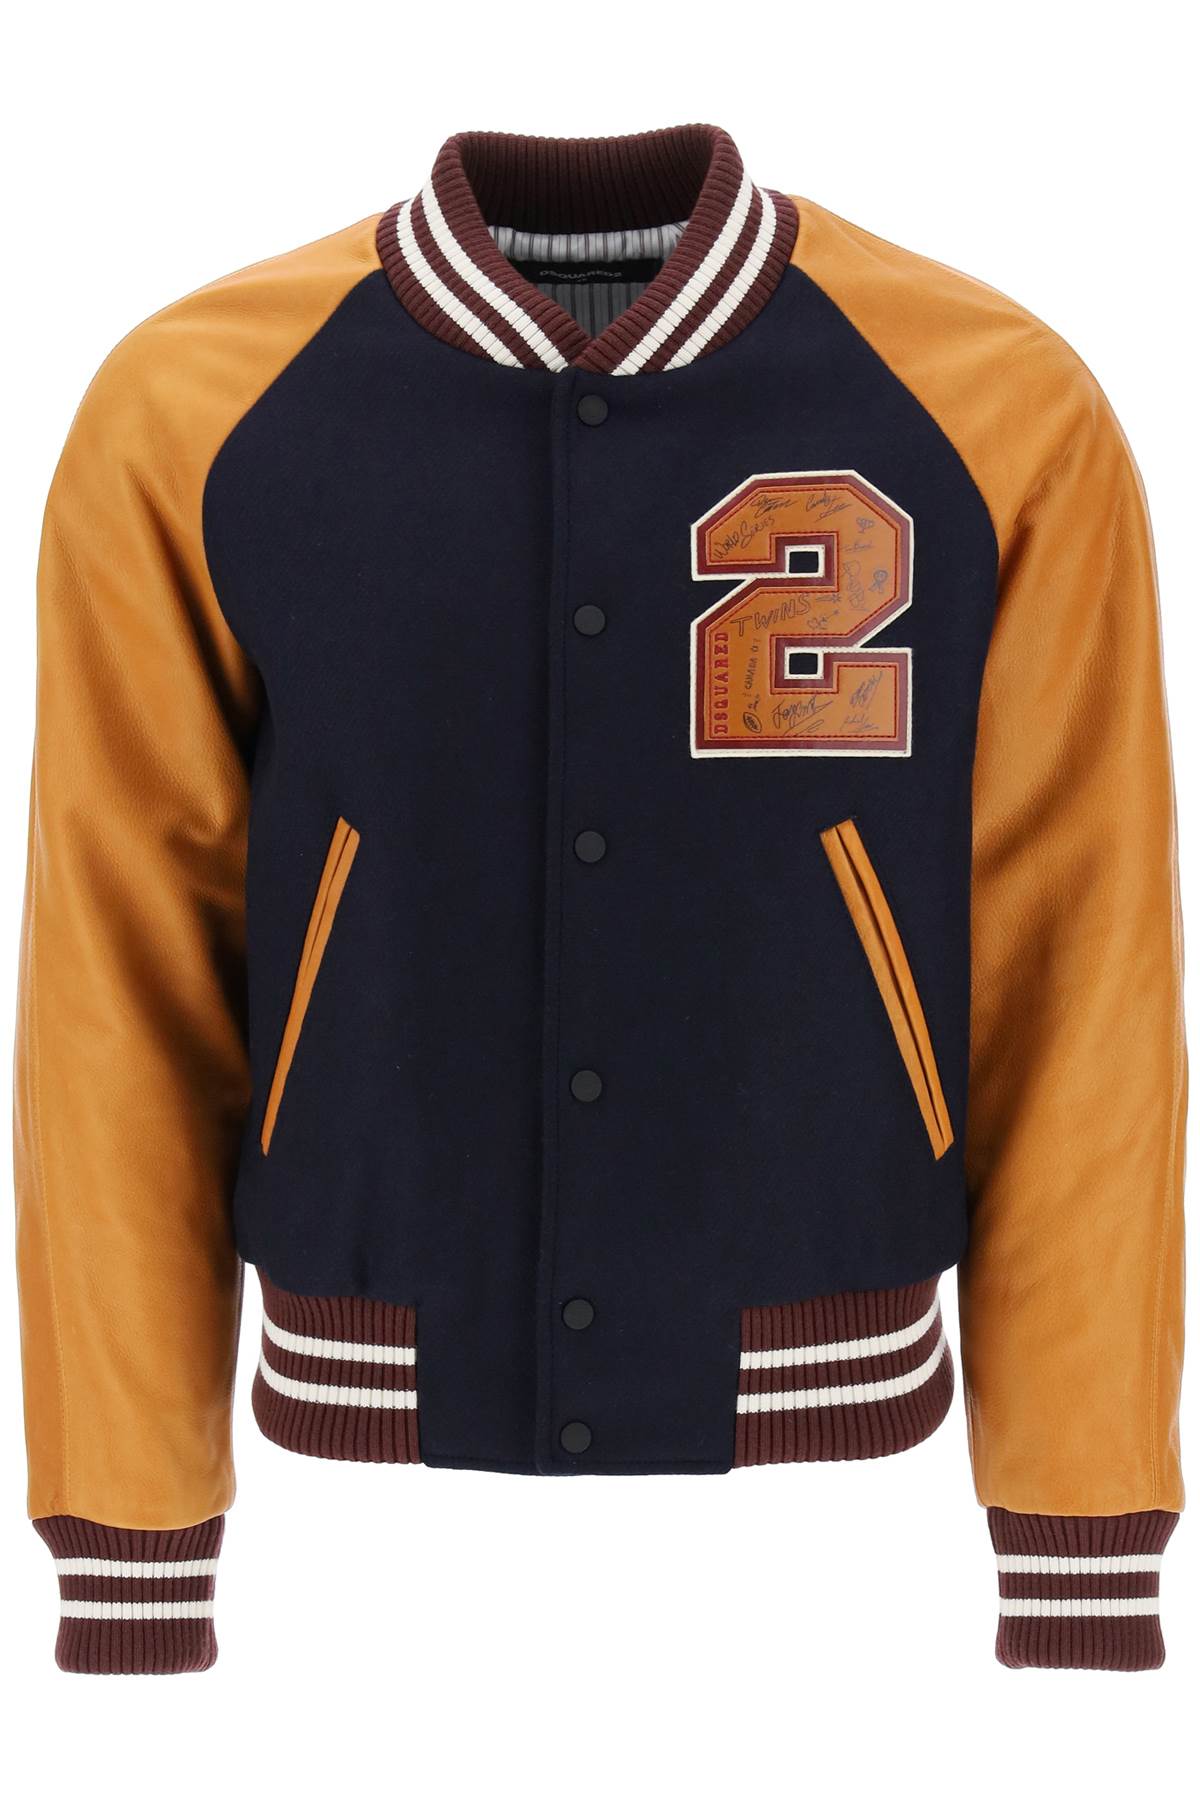 Dsquared2 Wool And Leather Varsity Jacket